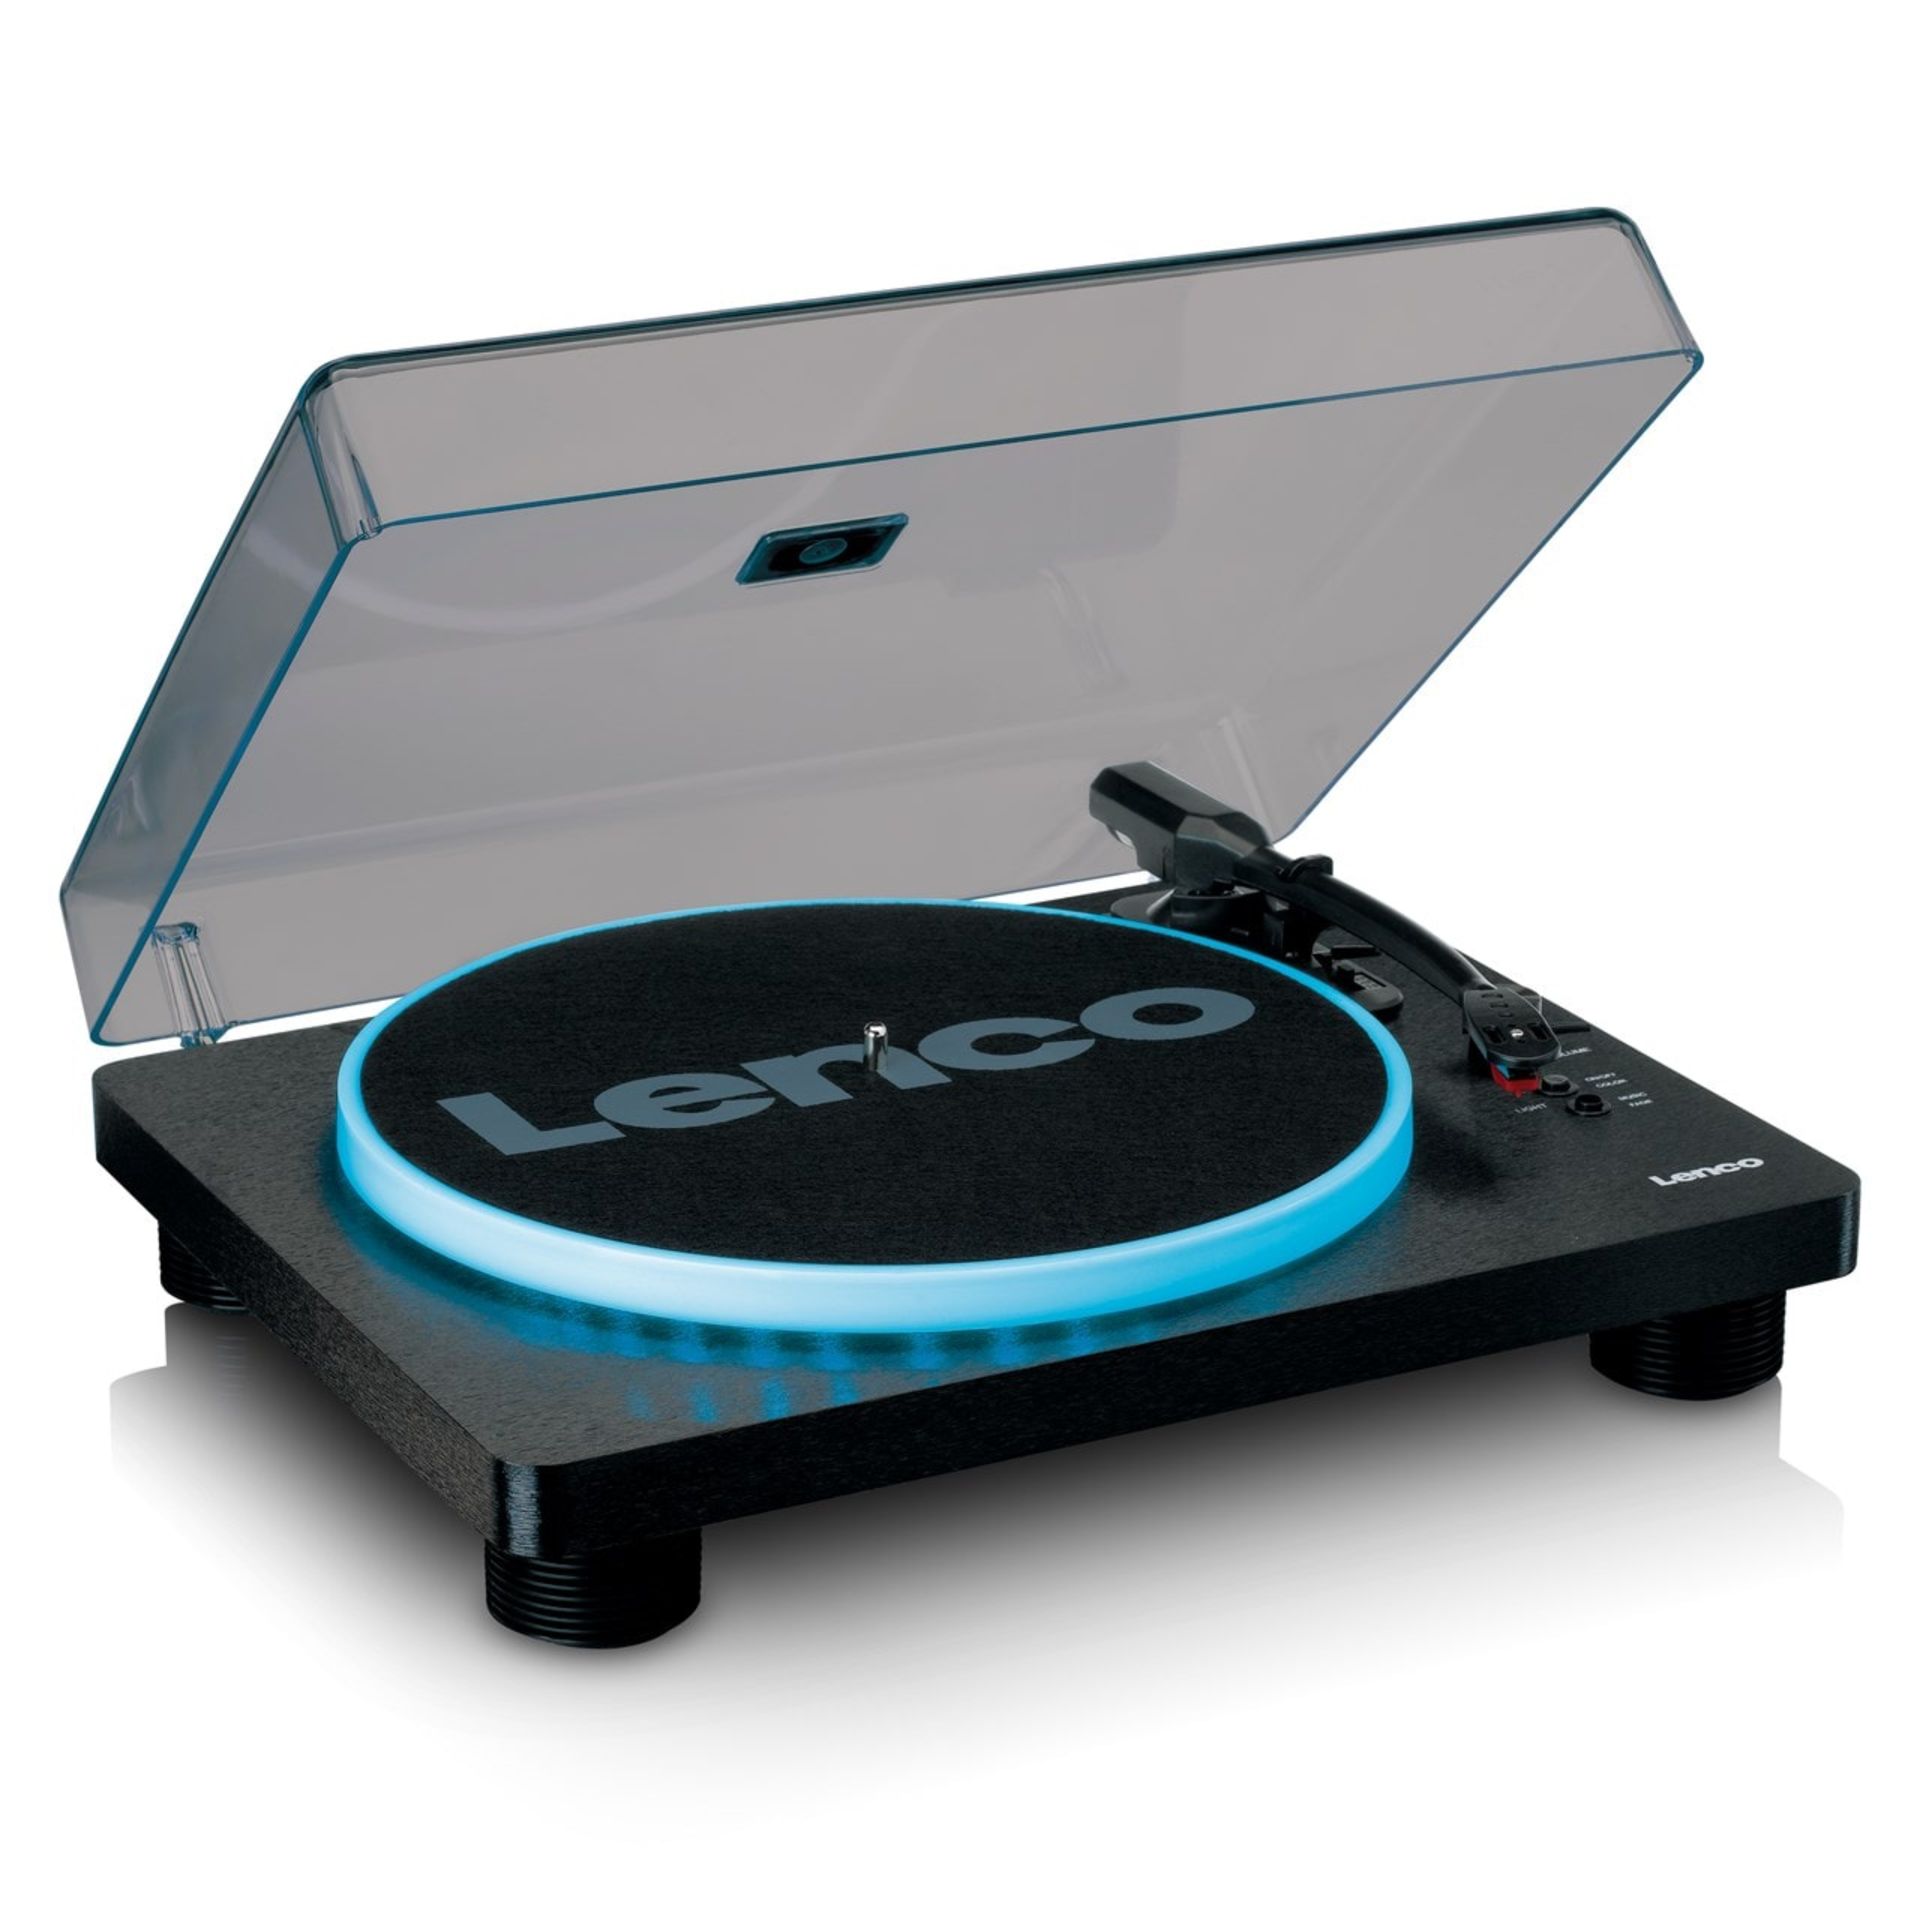 LENCO LS-50LED TURNTABLE WITH PC ENCODING WITH SPEAKERS, LIGHTS AND MUSIC DIGITISATION - RRP £199